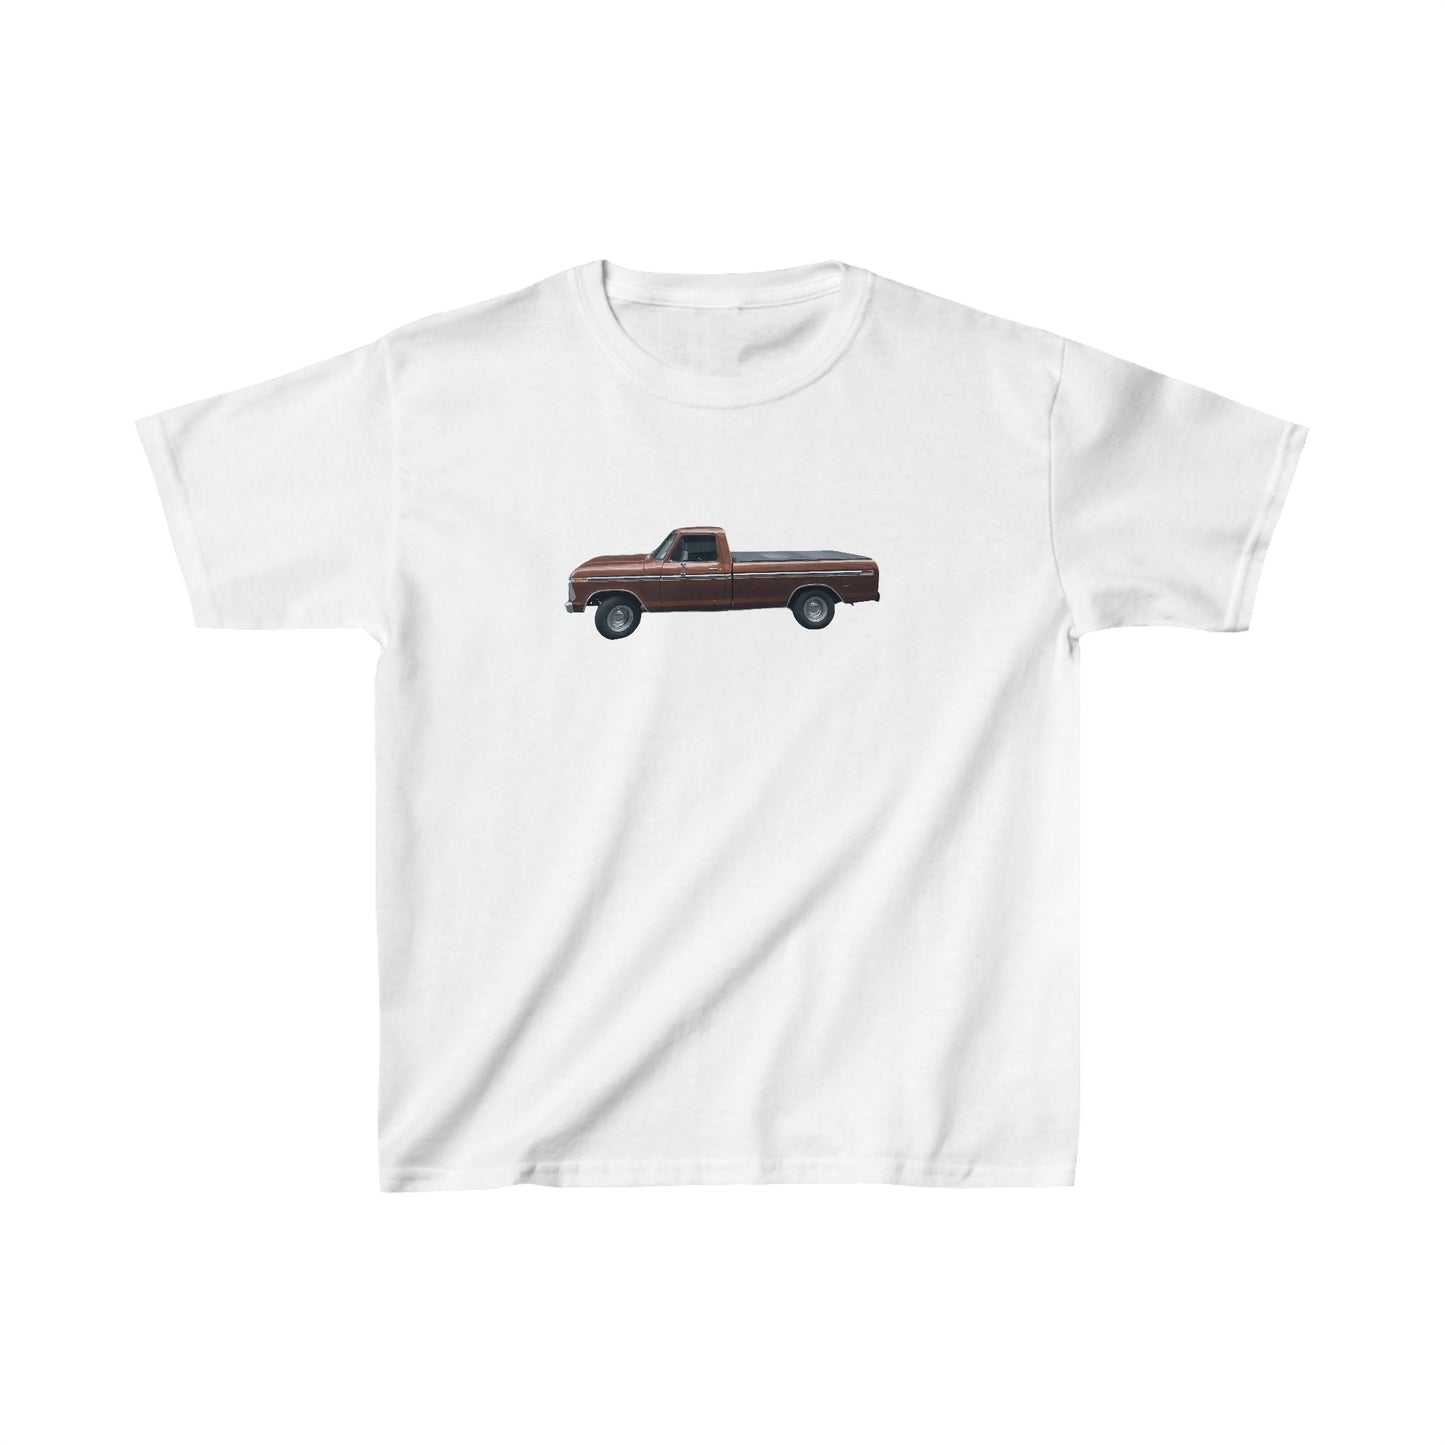 Antique Ford Truck Boxy Fit Baby Tee